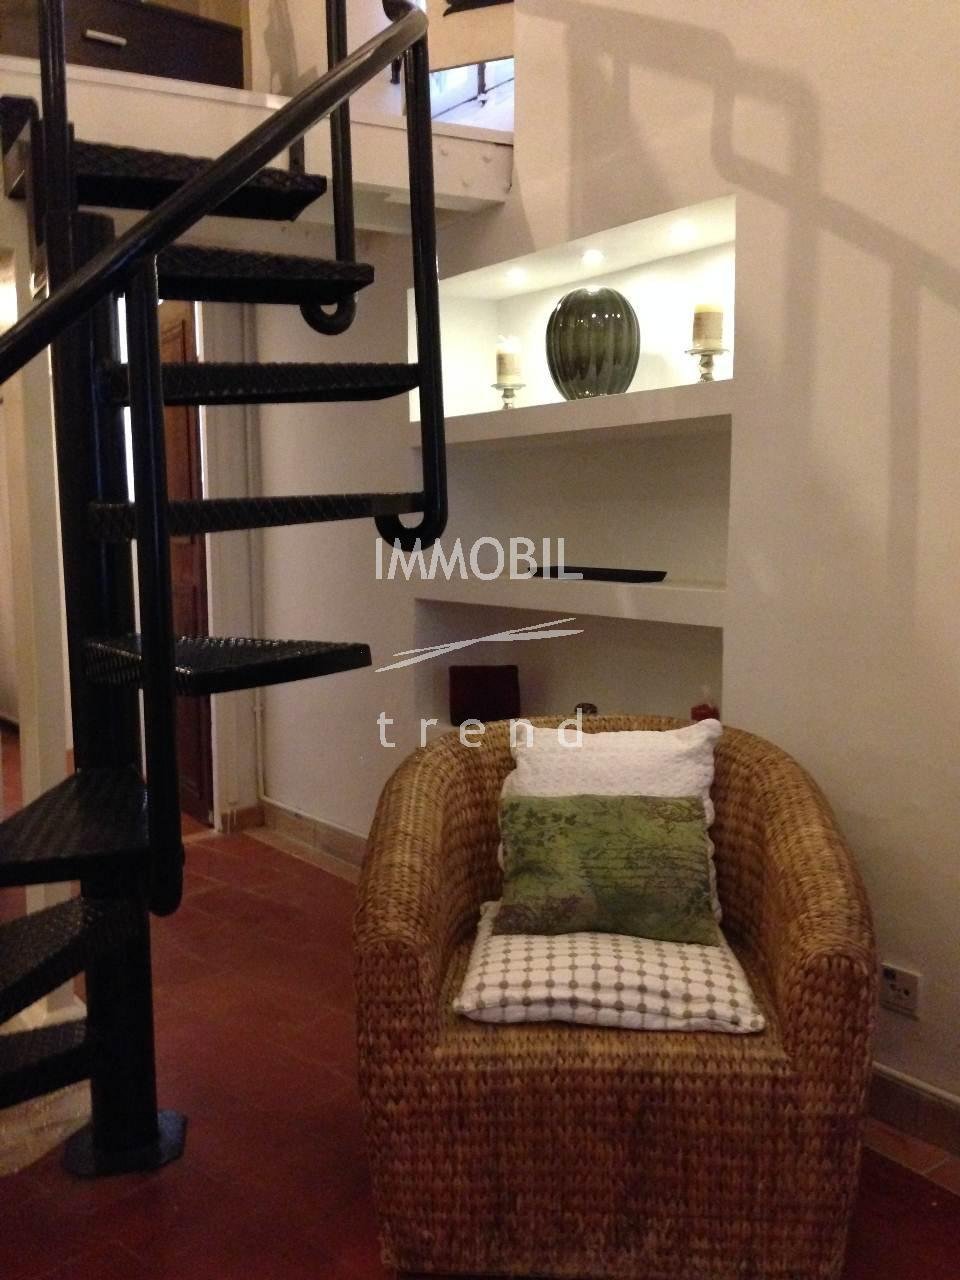 SOLE AGENT - MENTON OLD TOWN - Typical 1 bedroom apartment with mezzanine close to the sea